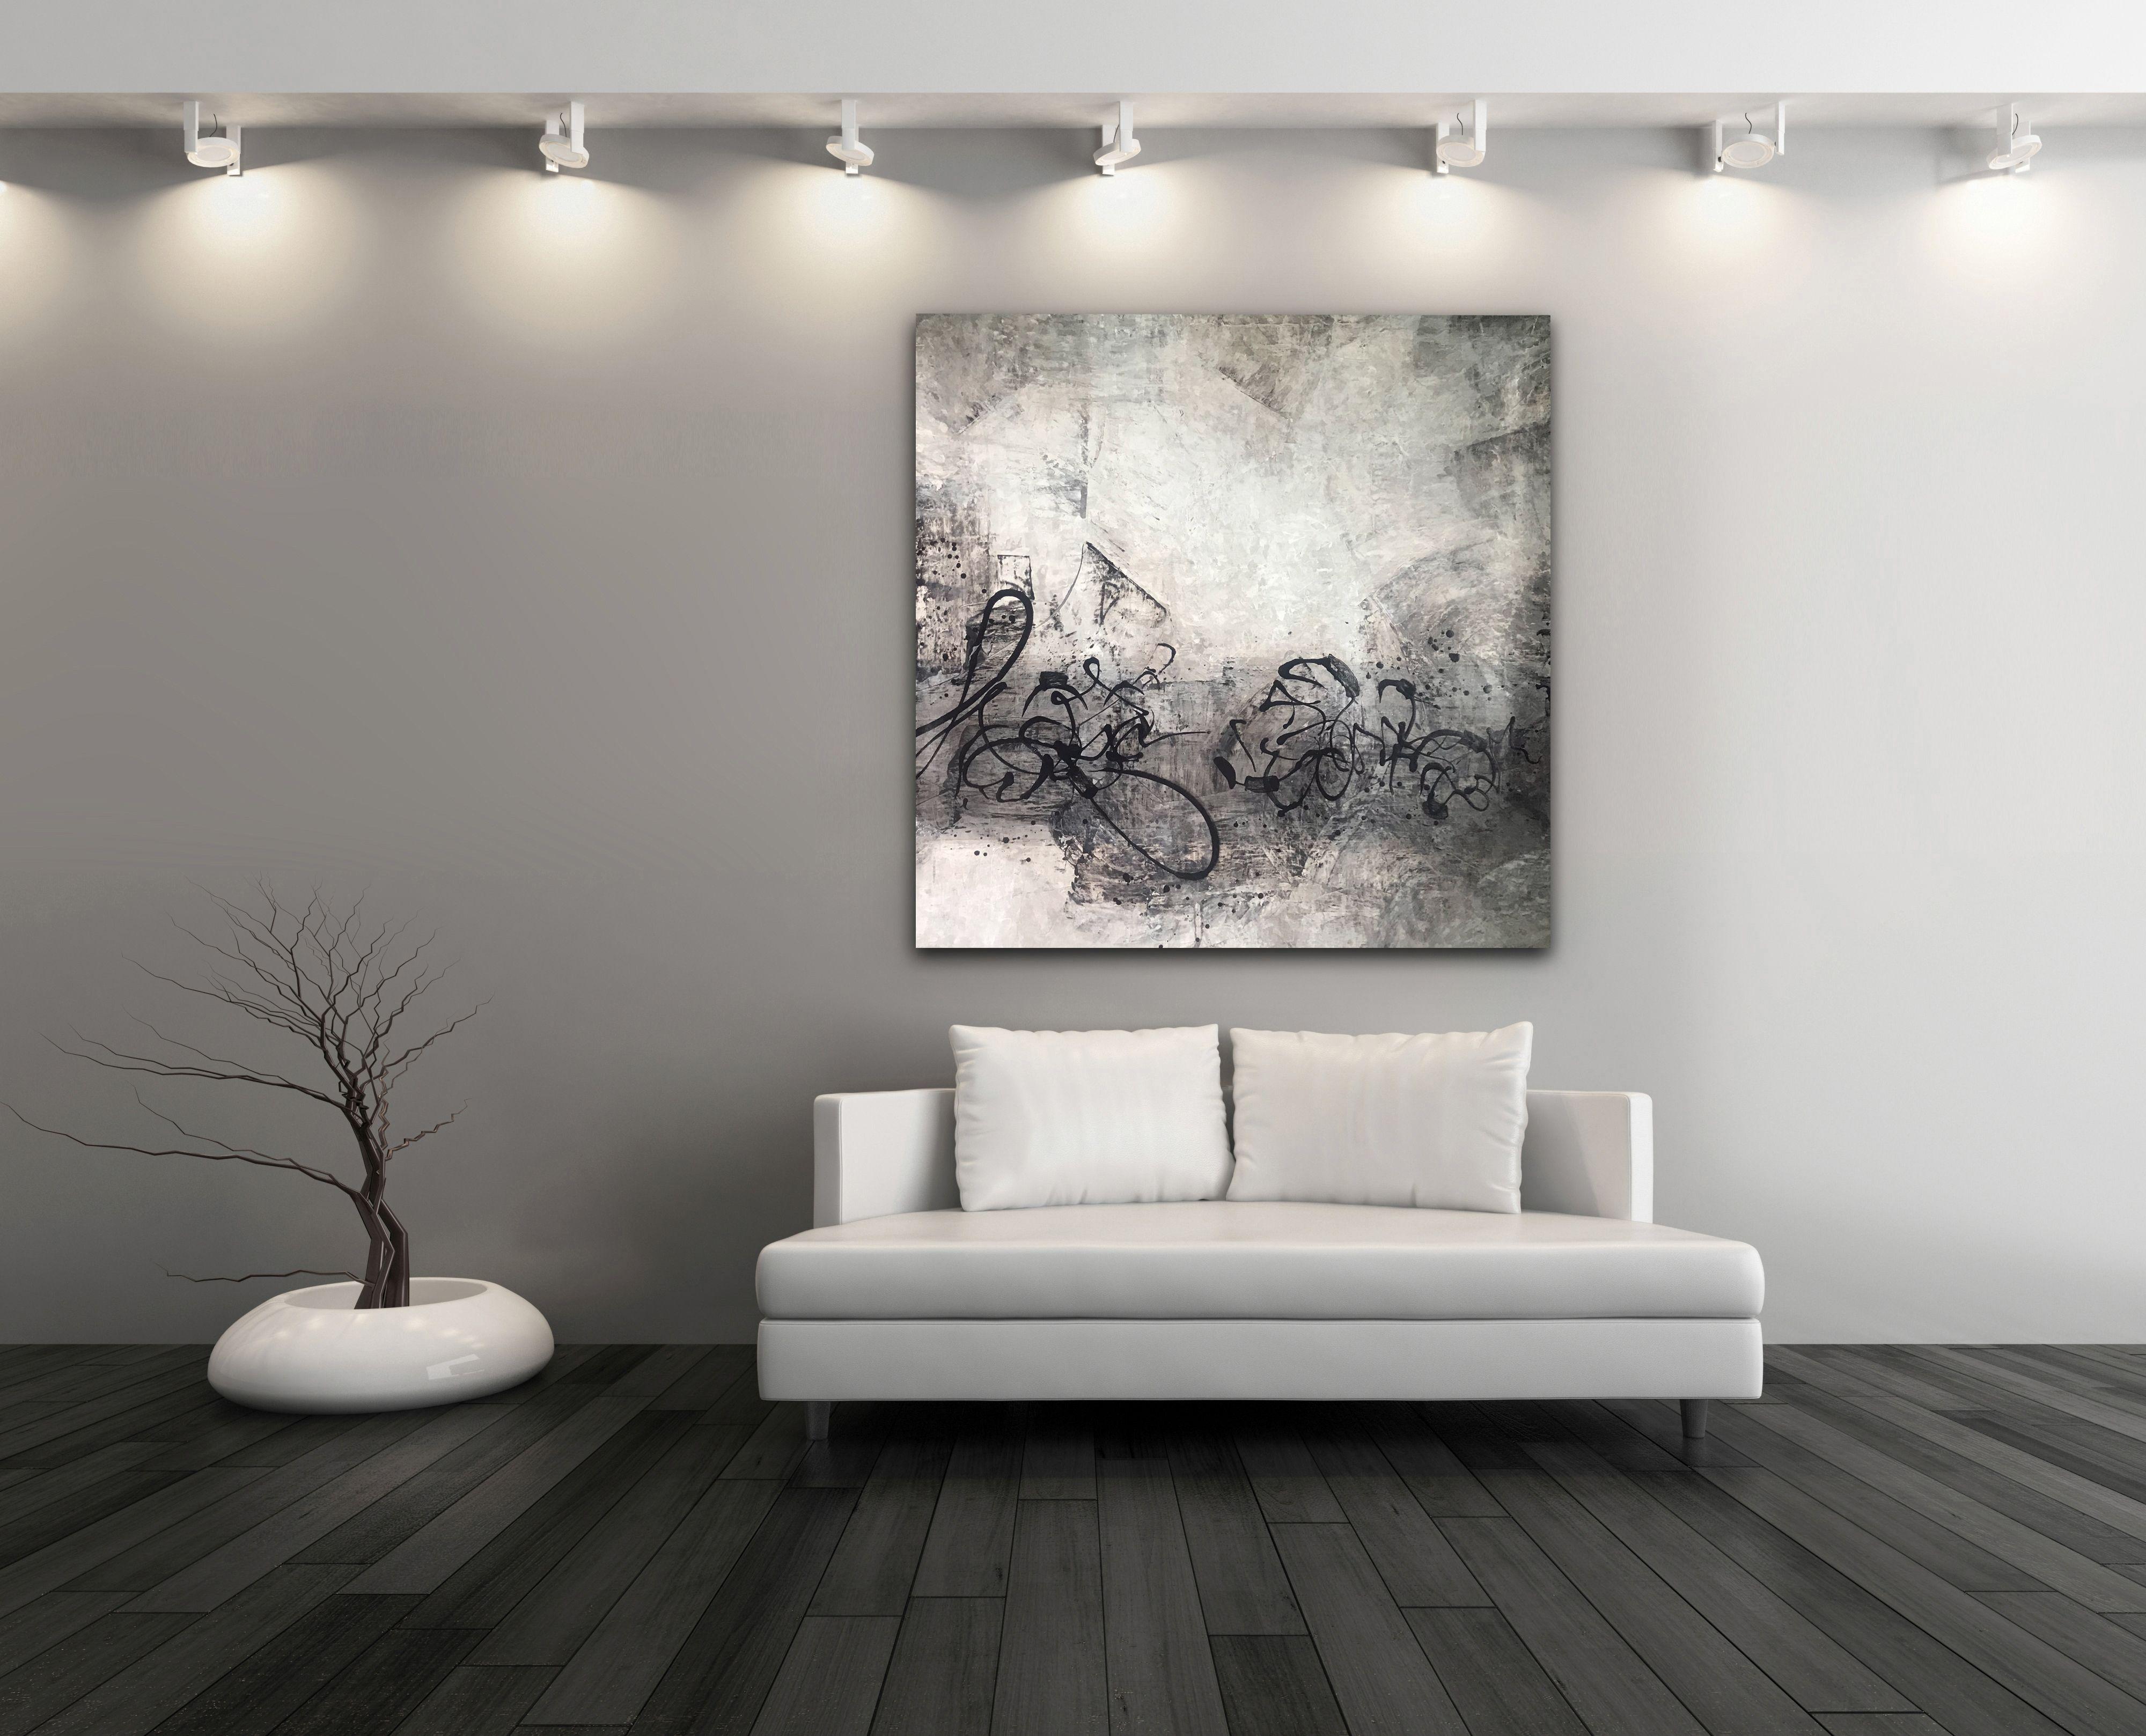 60 X 60 inches. Painted on canvas. Unframed. Ships rolled in a tube.    This is a large statement piece for lovers of minimalist modern art. Hints of warm gray (to the purple), and black and white are textured throughout the canvas. Stand back from